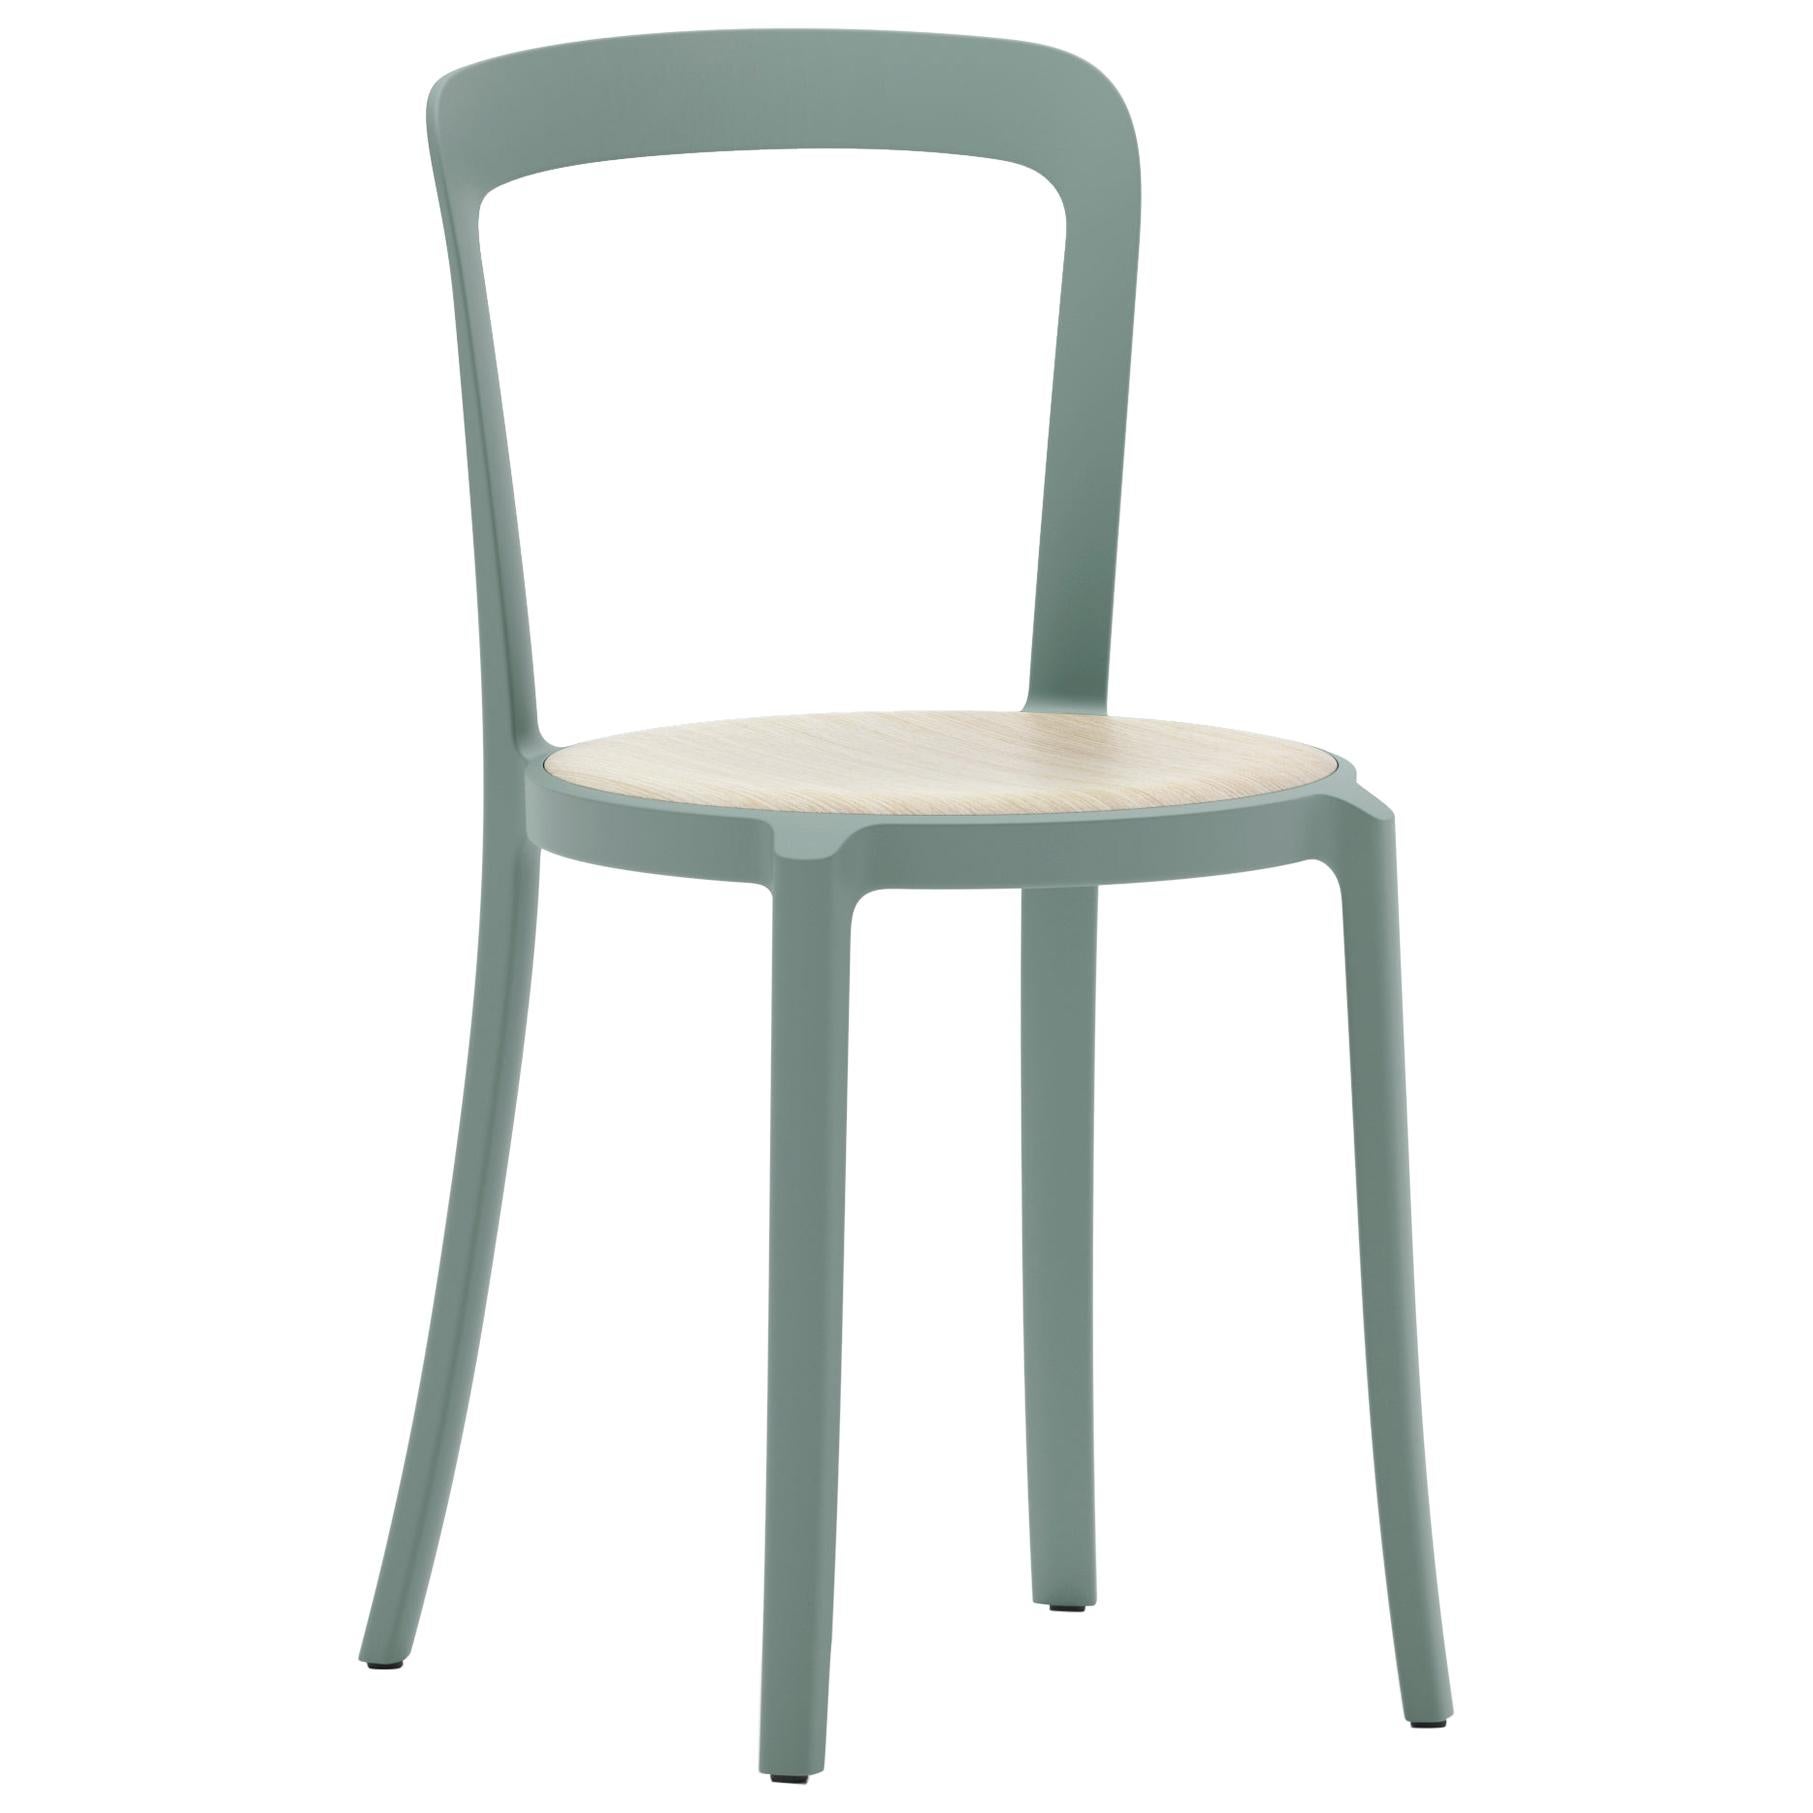 Emeco On & On Stacking Chair in Light Blue with Oak seat by Barber & Osgerby For Sale